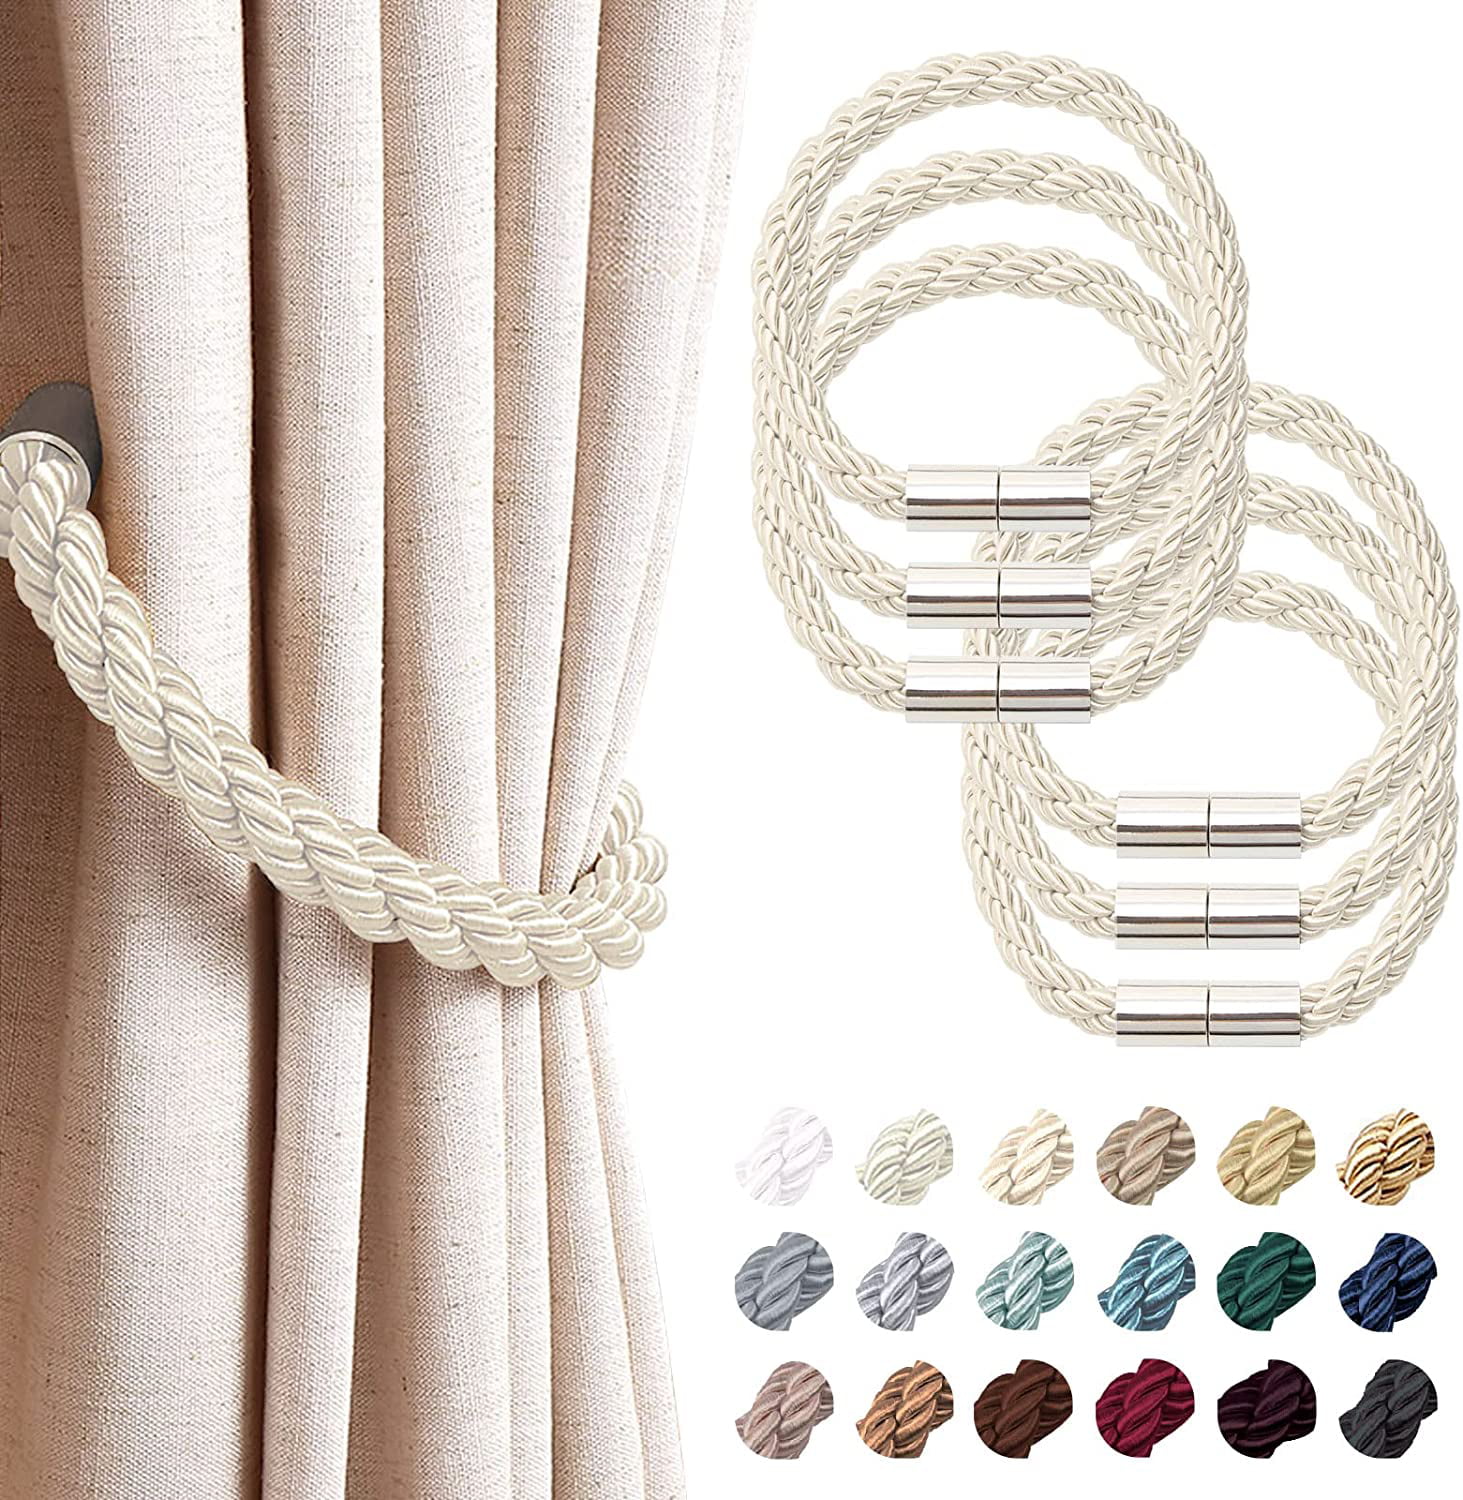 Suuchh 6 Pack Strong Magnetic Curtain Tiebacks Modern Simple Style Drape Tie Backs Convenient Decorative Weave Rope Curtain Holdbacks for Thin or Thick Home